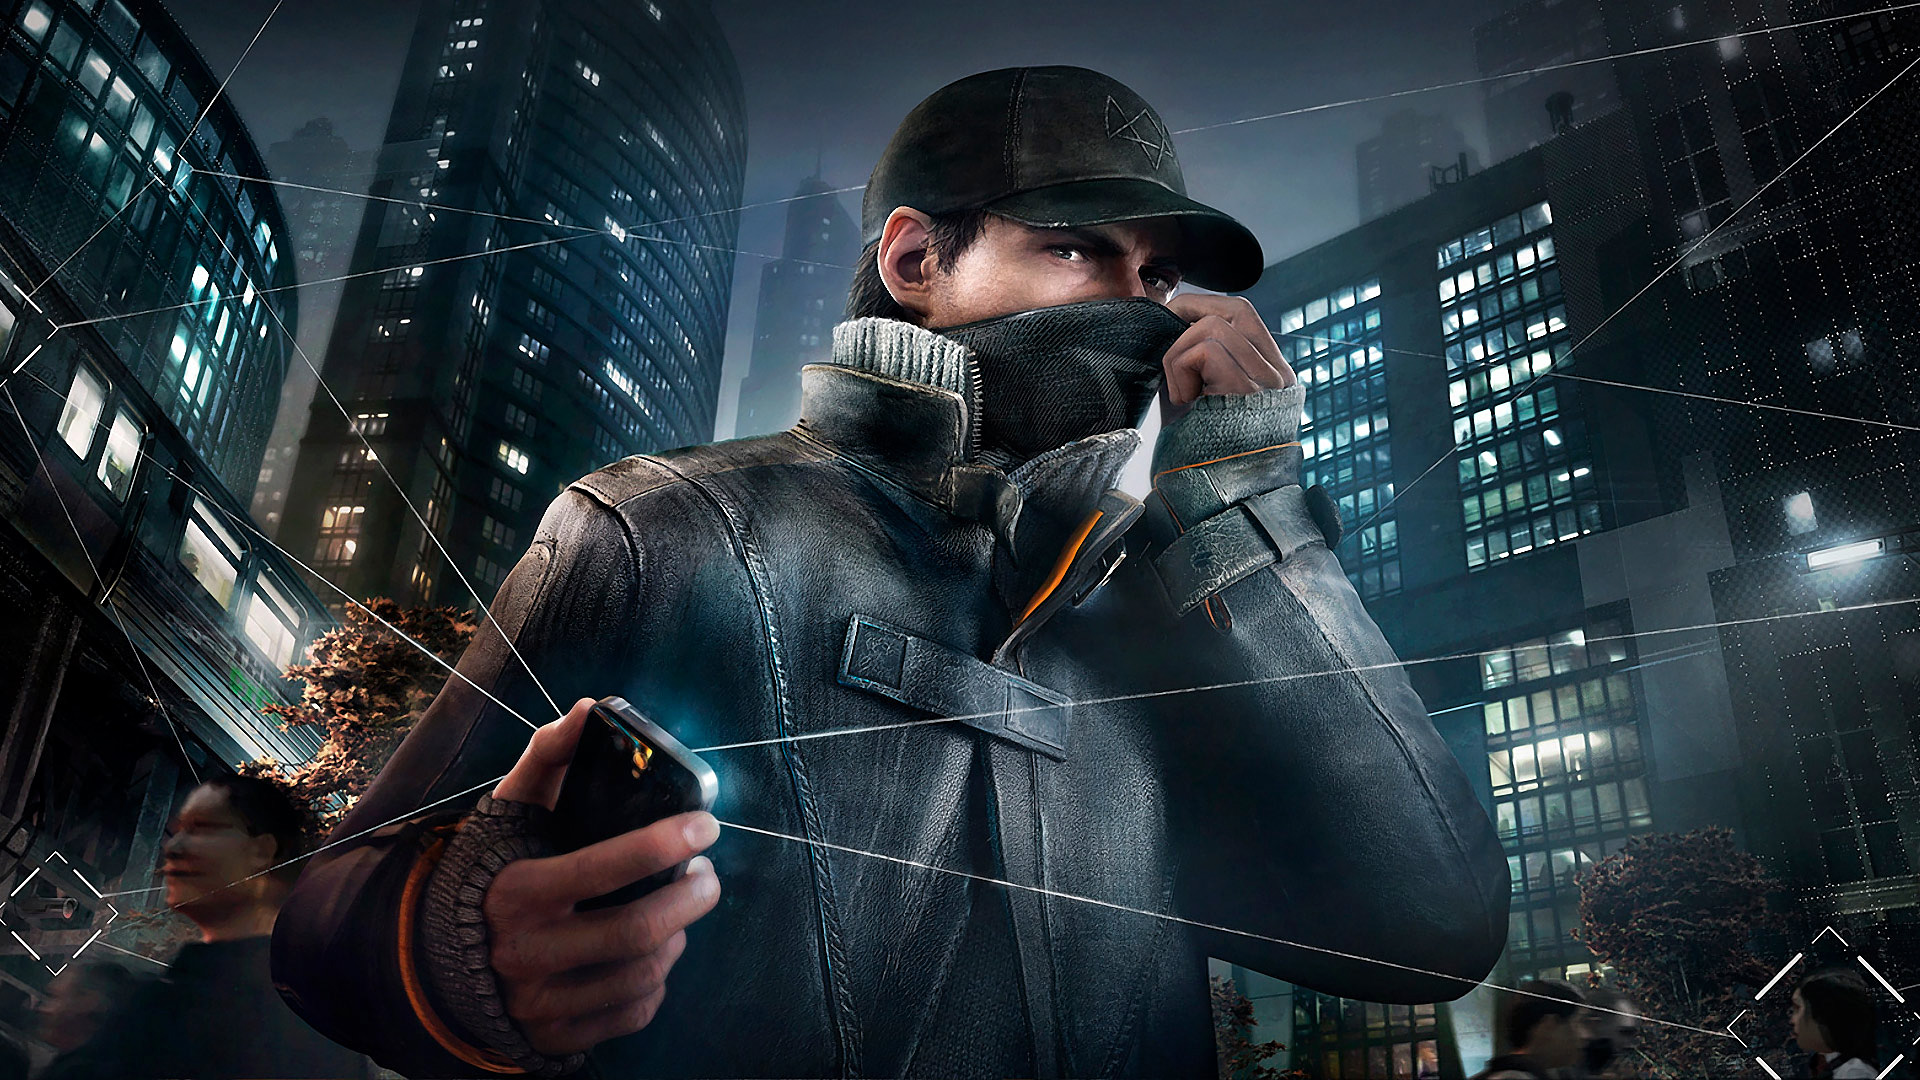 watch dogs, video game, aiden pearce